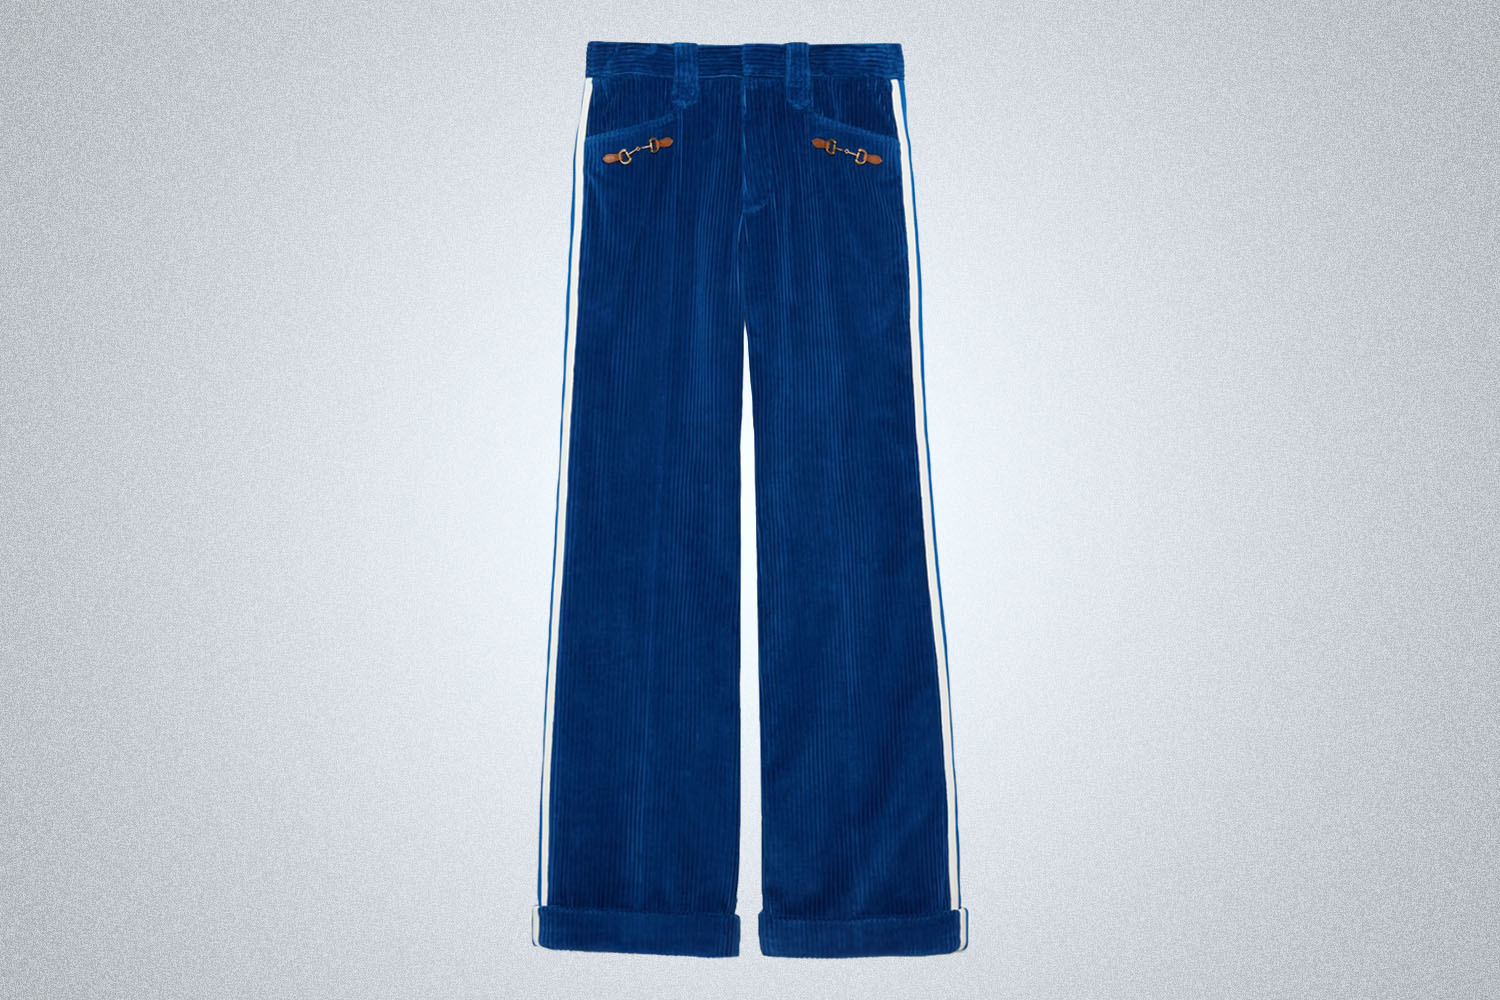 a pair of blue corduroy pants from Adidas x Gucci on a grey background